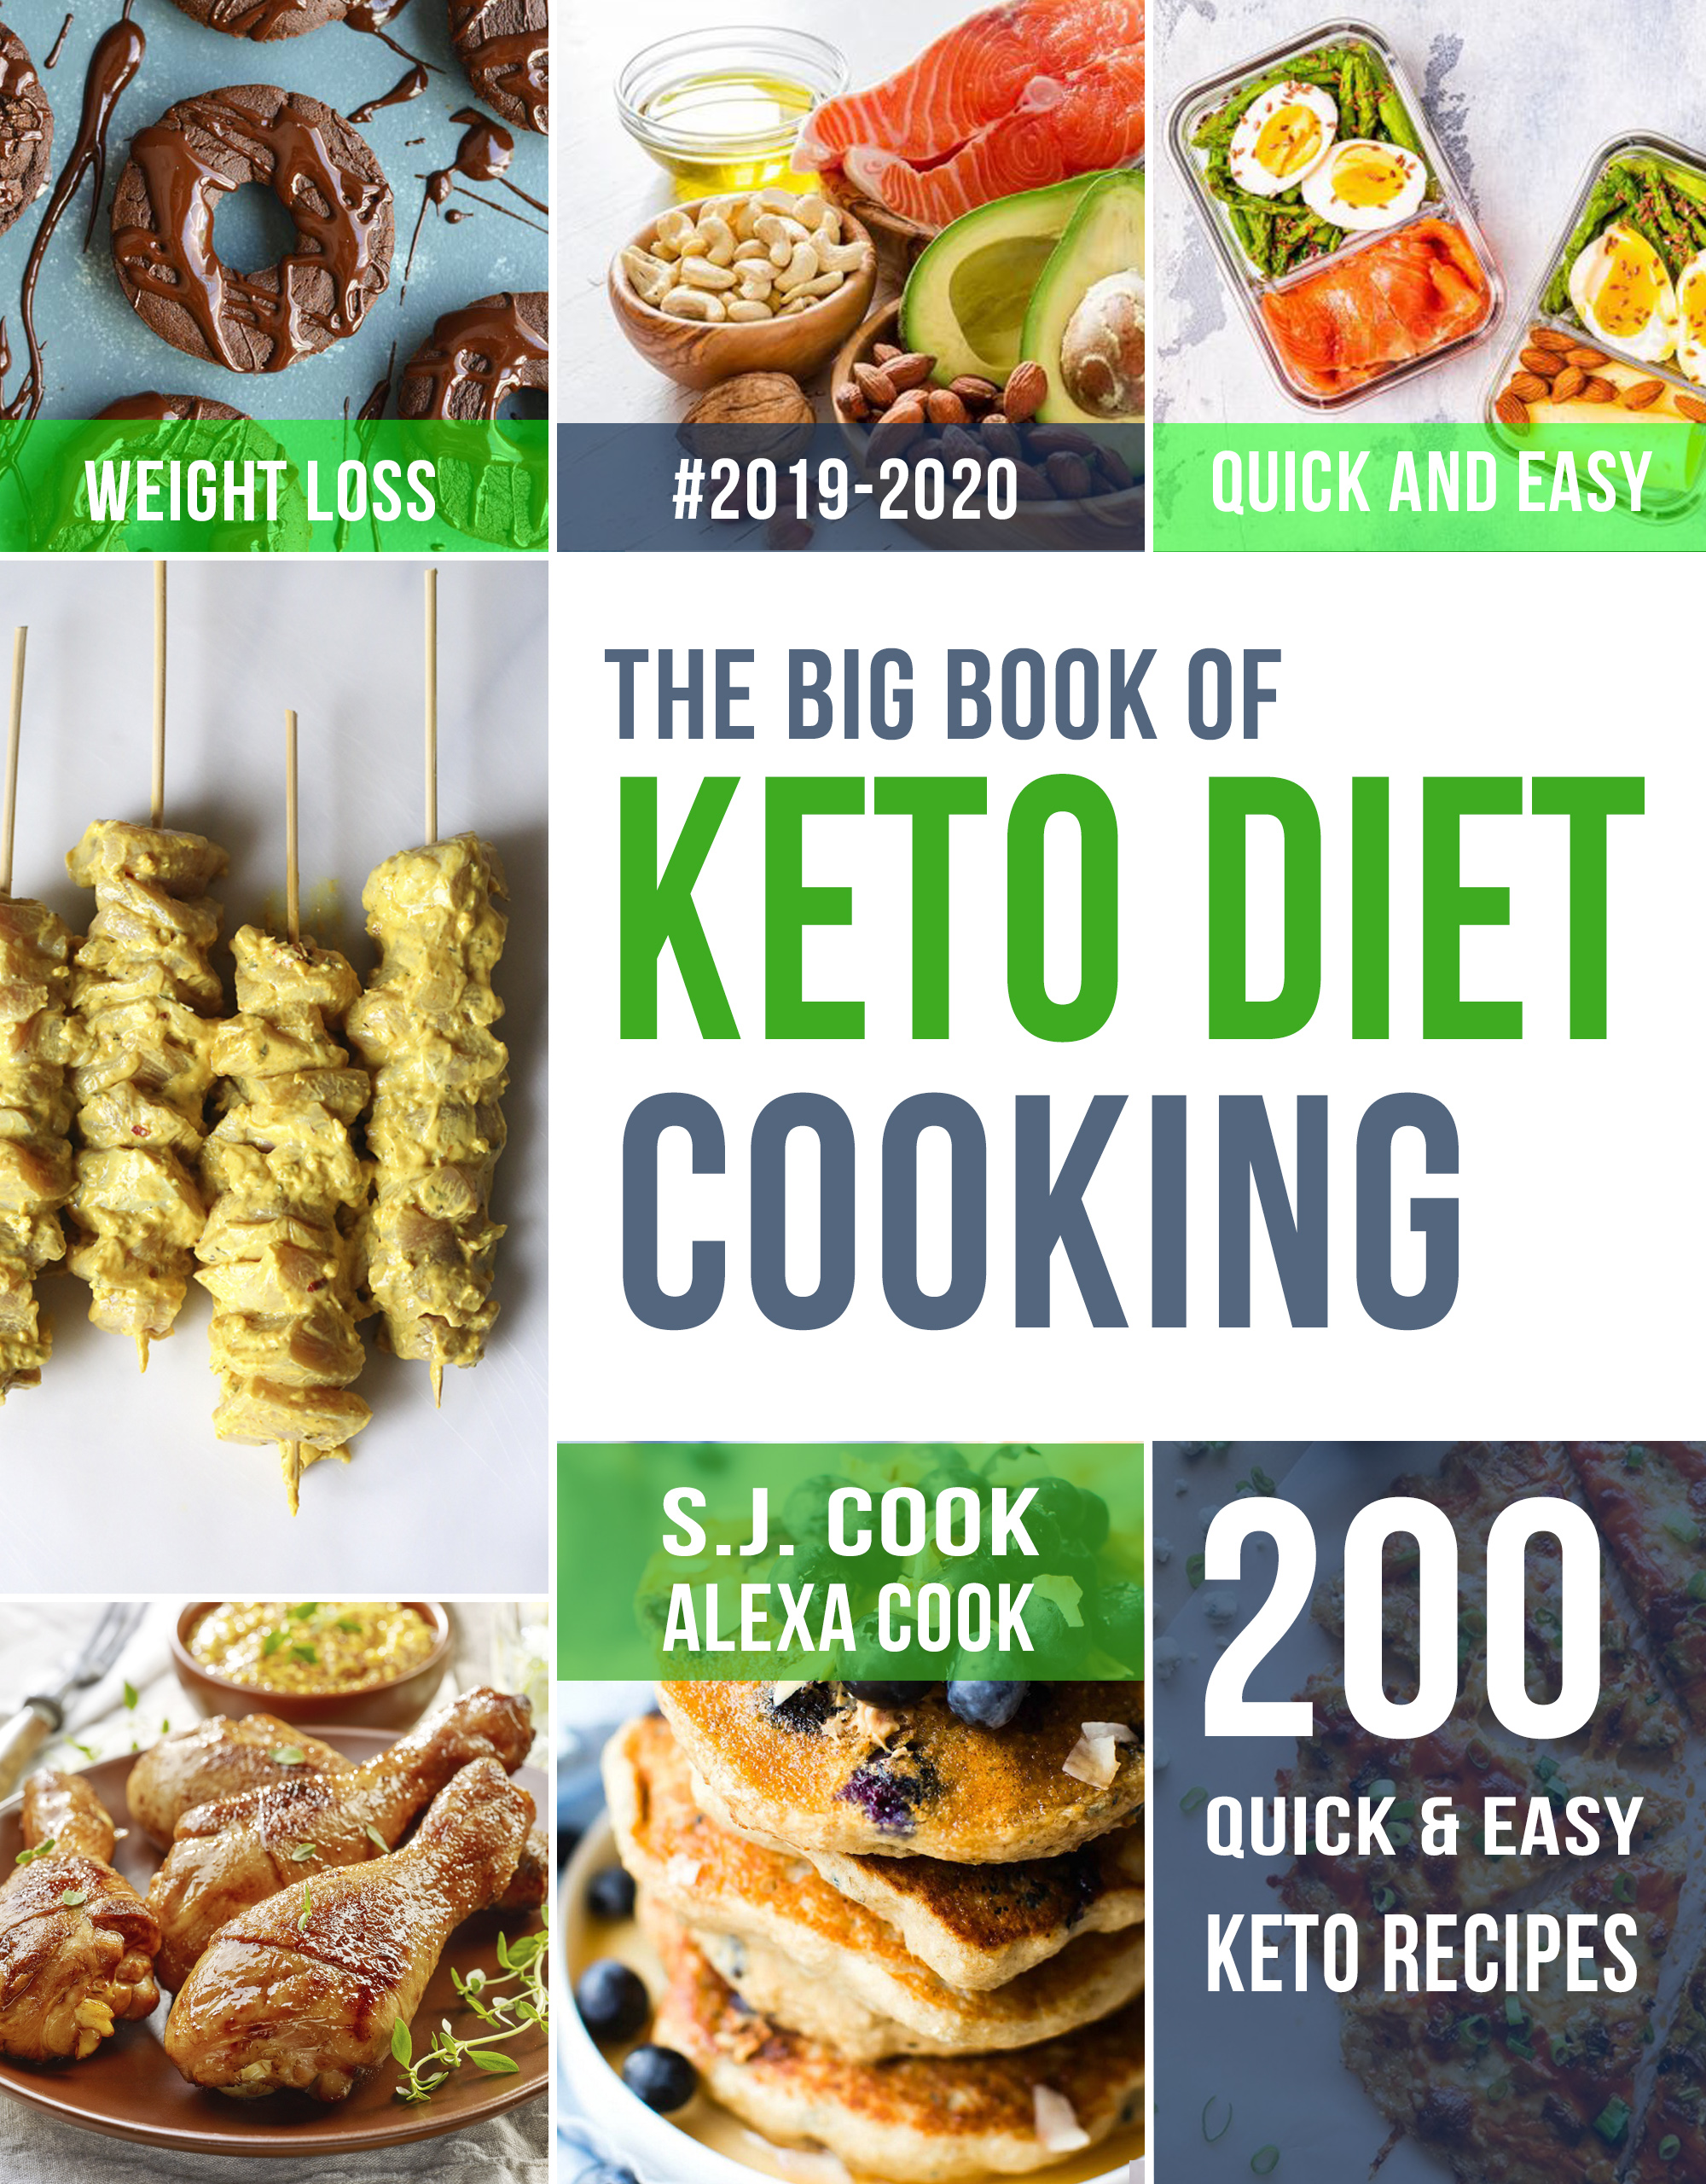 FREE: The Big Book of Keto Diet Cooking: 200 Quick & Easy Ketogenic Recipes and Easy 5-Week Meal Plans for a Healthy Keto Lifestyle (Lose Up to 40 Pounds in 5 Weeks) by S.J. Cook